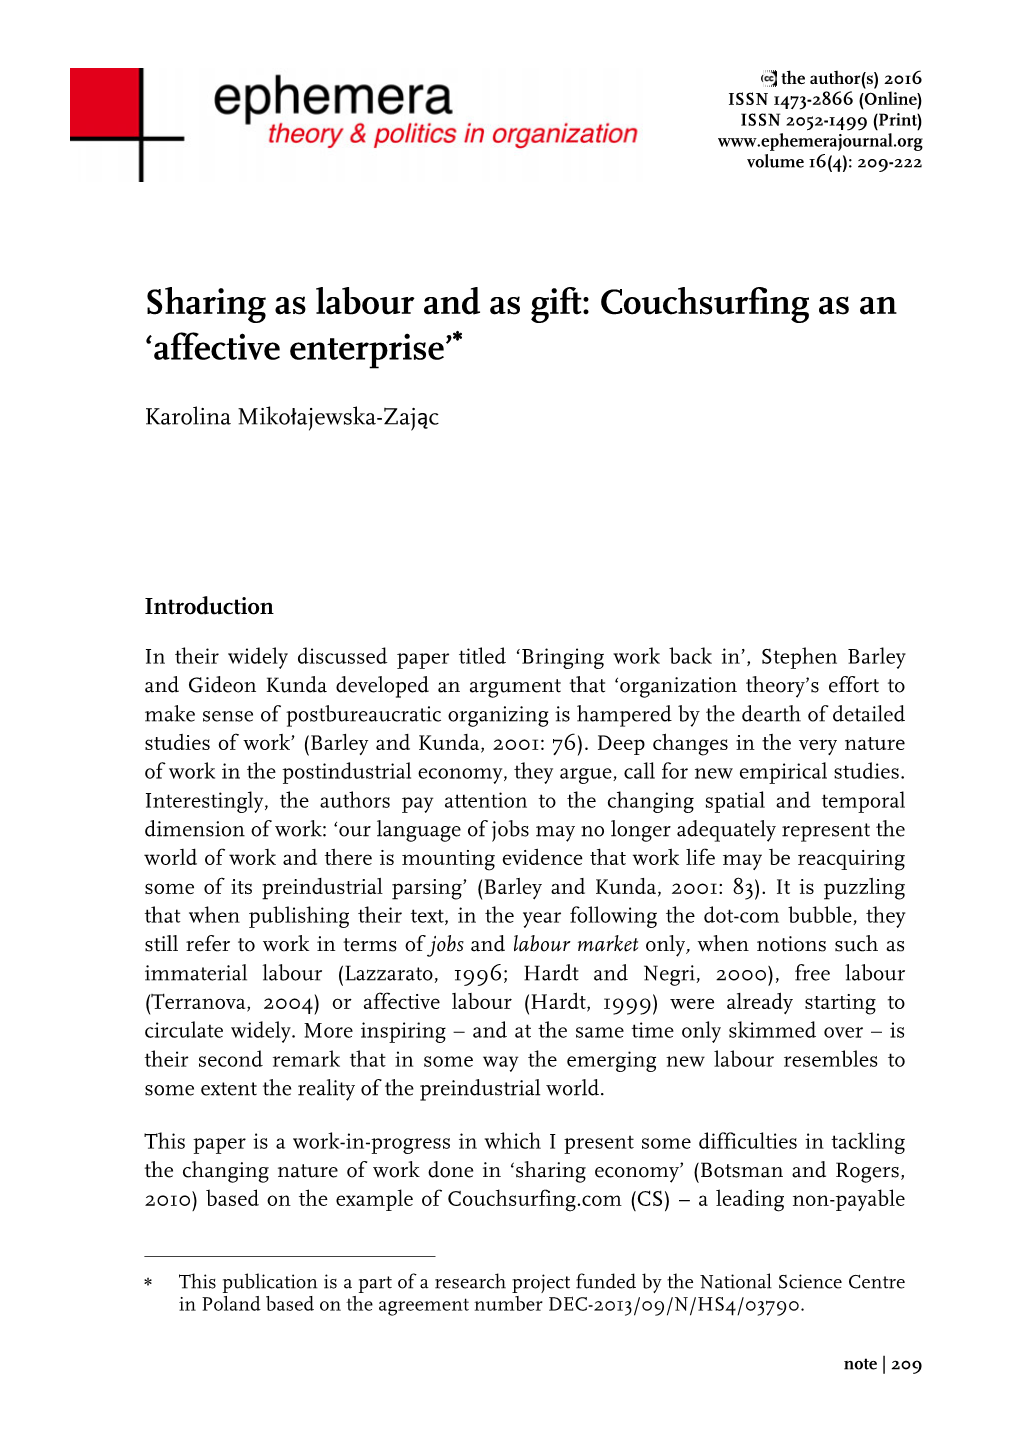 Sharing As Labour and As Gift: Couchsurfing As an 'Affective Enterprise'